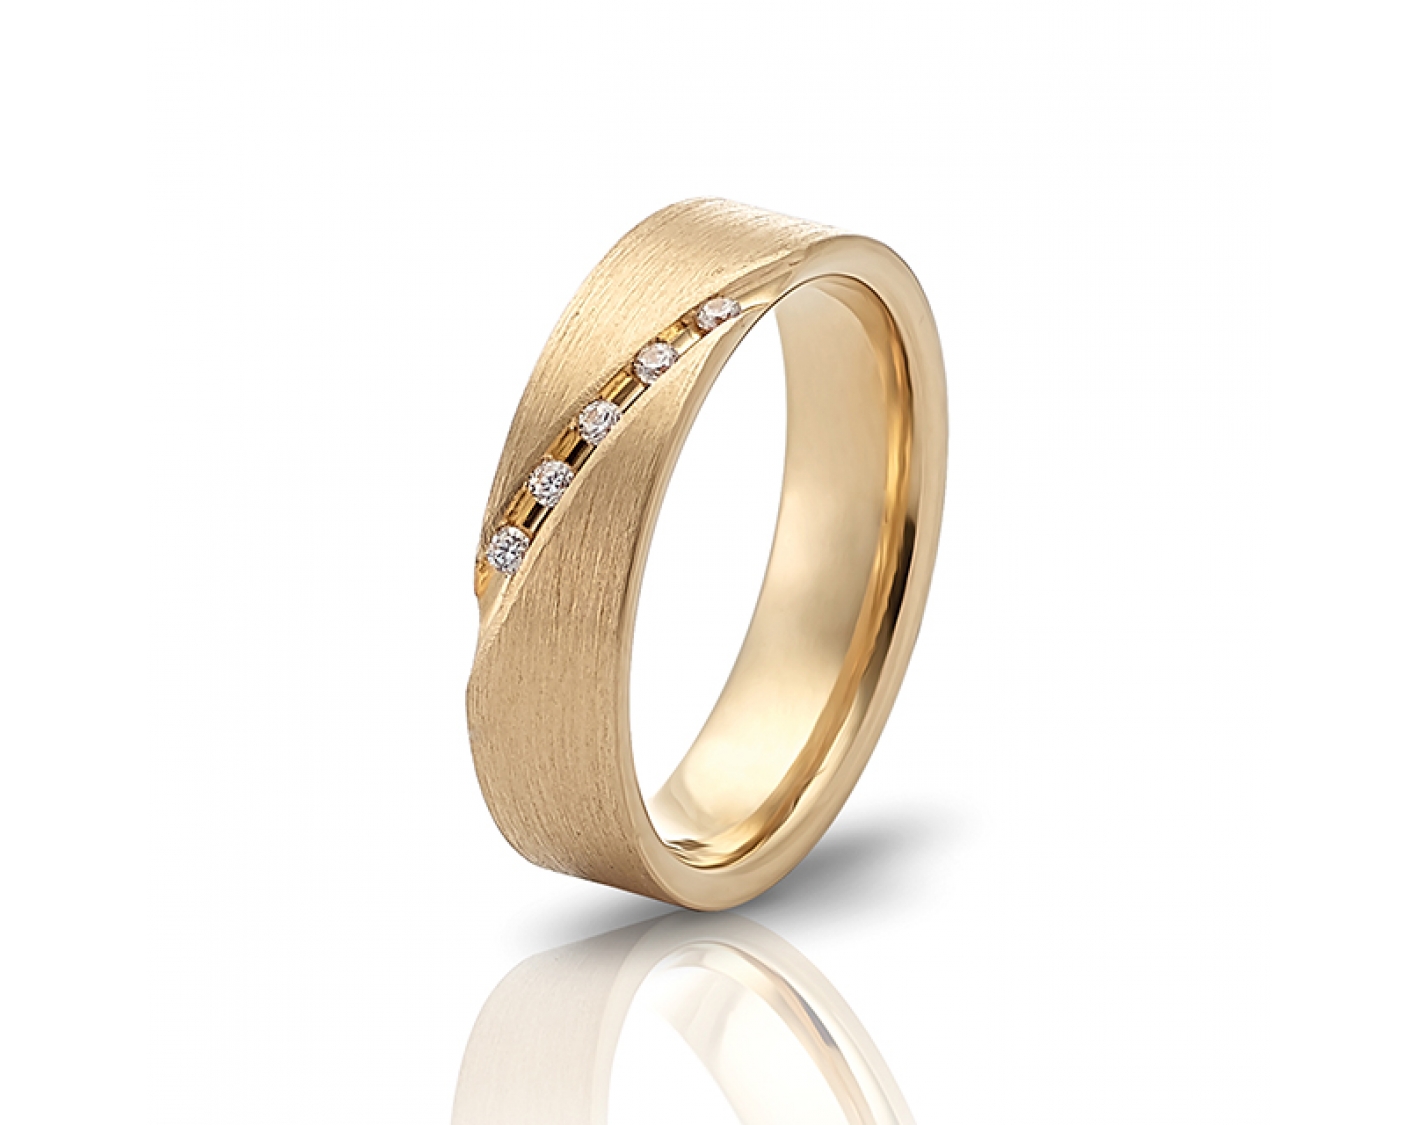 18k yellow gold 5mm matte wedding band with diagonal line and diamonds Photos & images